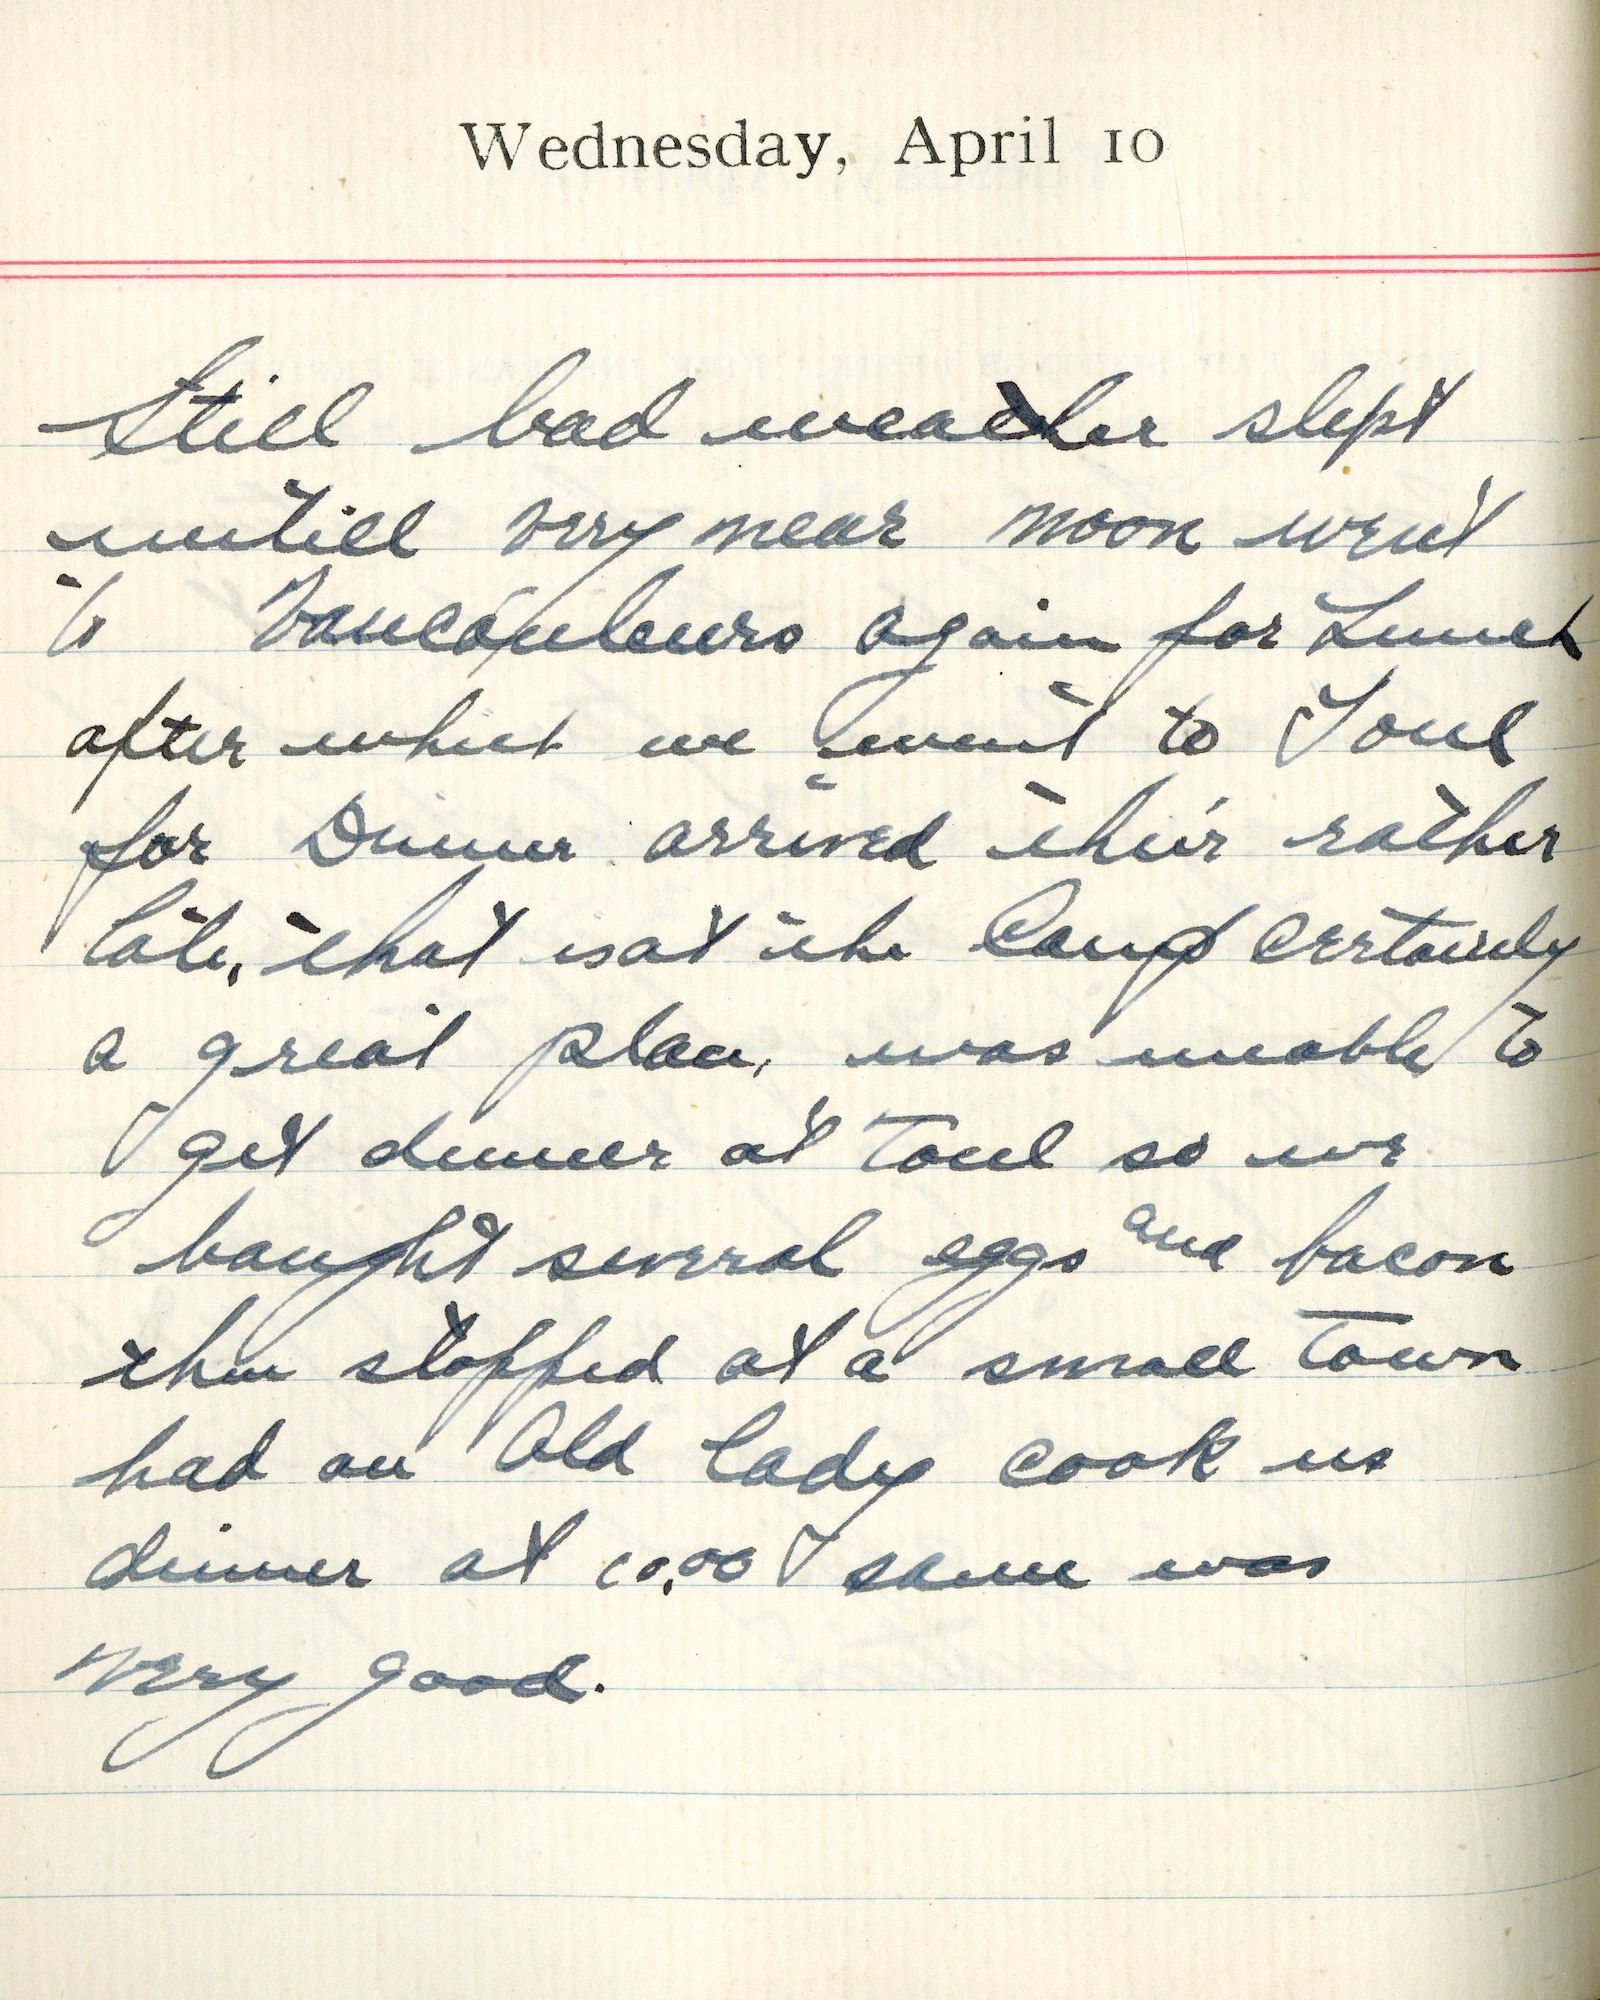 Capt. Edward V. Rickenbacker's 1918 wartime diary entry. (04/10/1918). Still bad weather.  Slept until very near noon.  Went to Vaucouleurs again for lunch after which we went to Toul for dinner.  Arrived there rather late, that is, at the camp. Certainly a great place.  Was unable to get dinner at Toul so we bought several eggs and bacon then stopped at a small town.  Had an old lady cook us dinner at 10:00.  Sauce was very good.